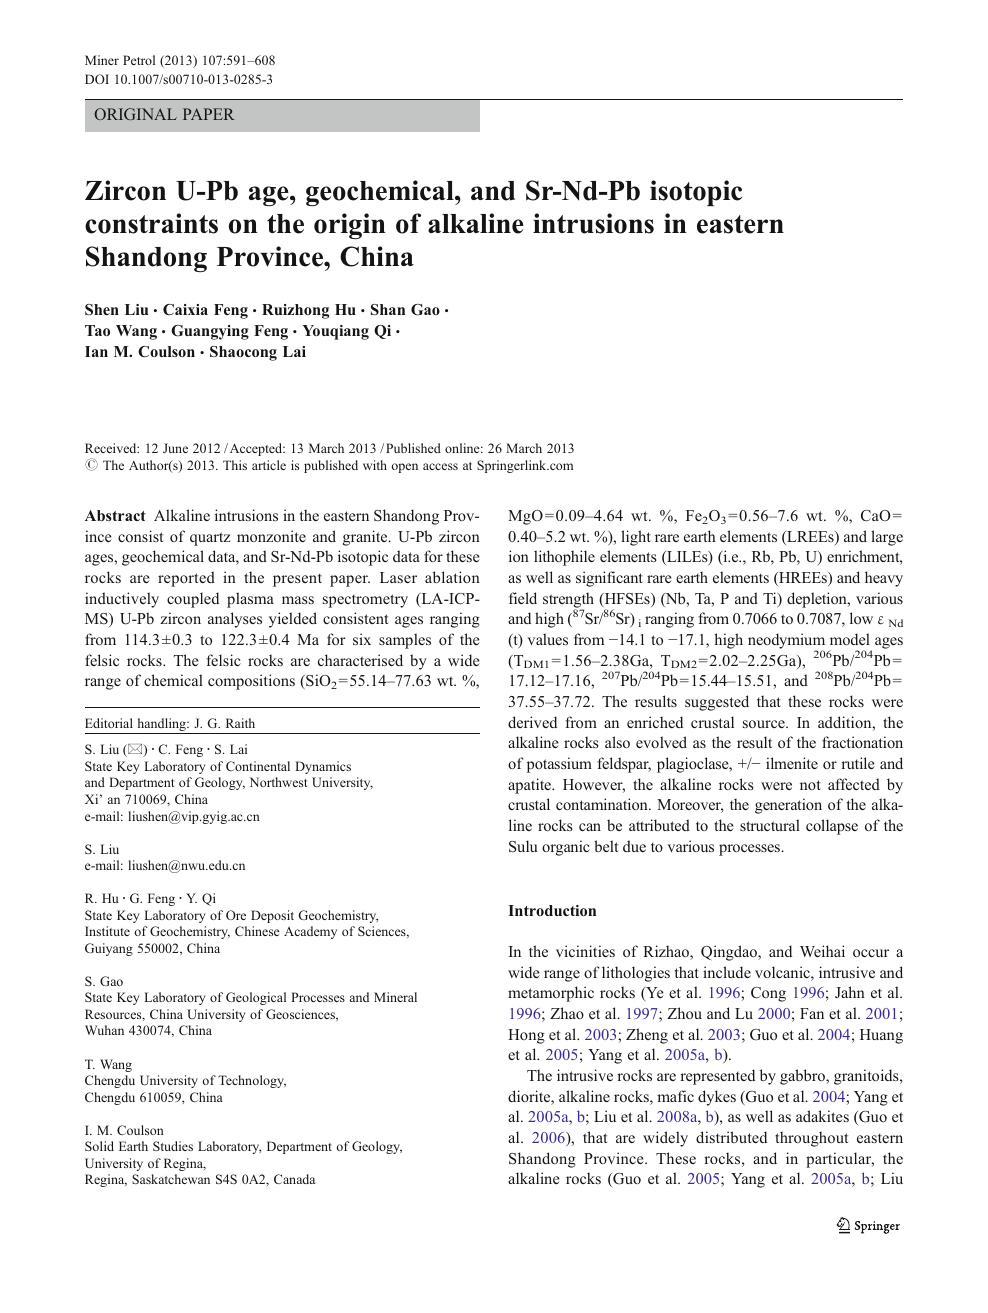 Zircon U Pb Age Geochemical And Sr Nd Pb Isotopic Constraints On The Origin Of Alkaline Intrusions In Eastern Shandong Province China Topic Of Research Paper In Earth And Related Environmental Sciences Download Scholarly